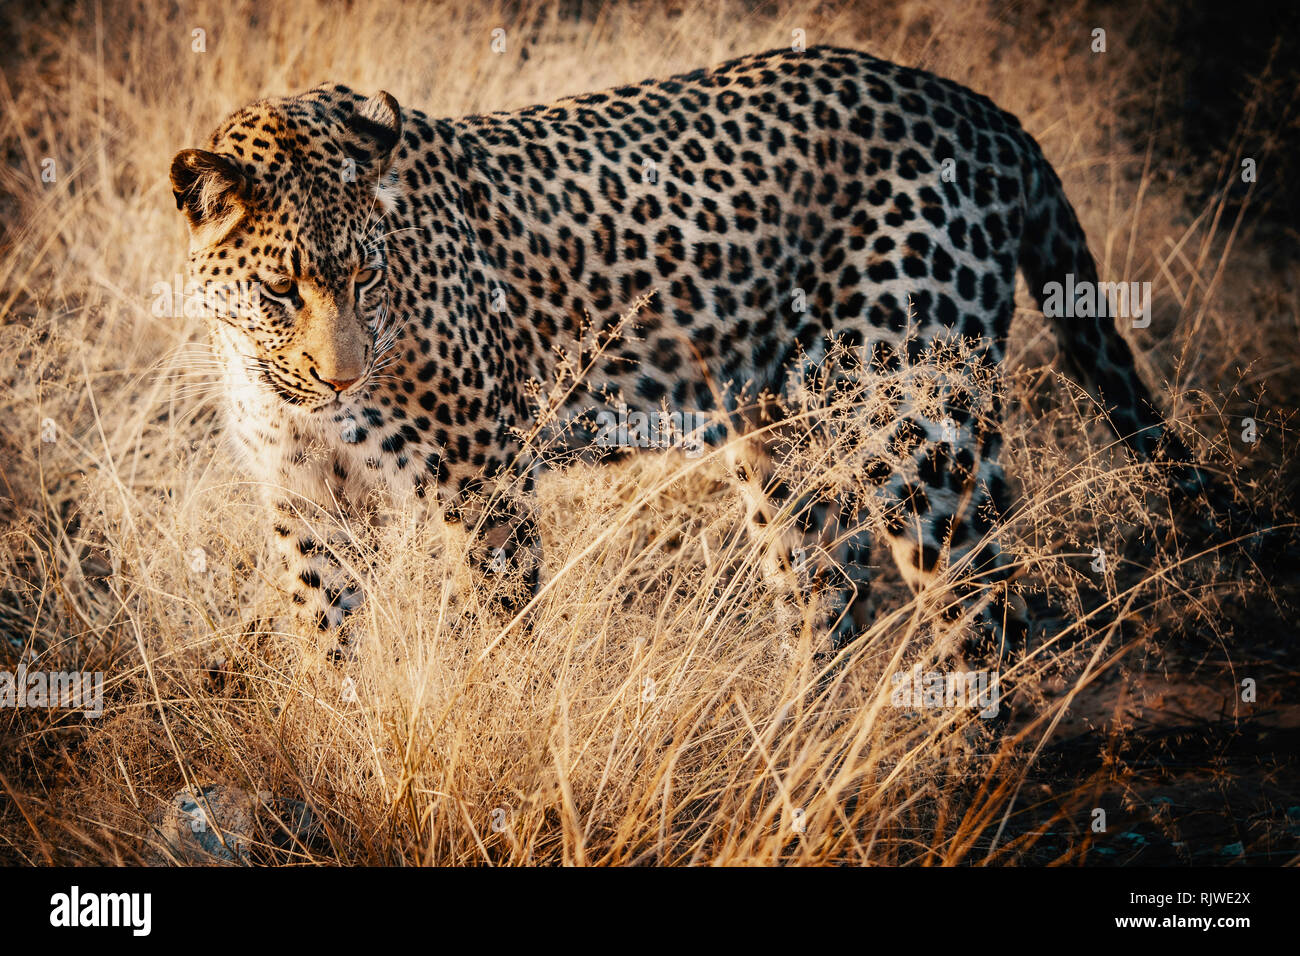 Portrait of a leopard in a large outdoor enclosure at sunset on a farm in Namibia Stock Photo